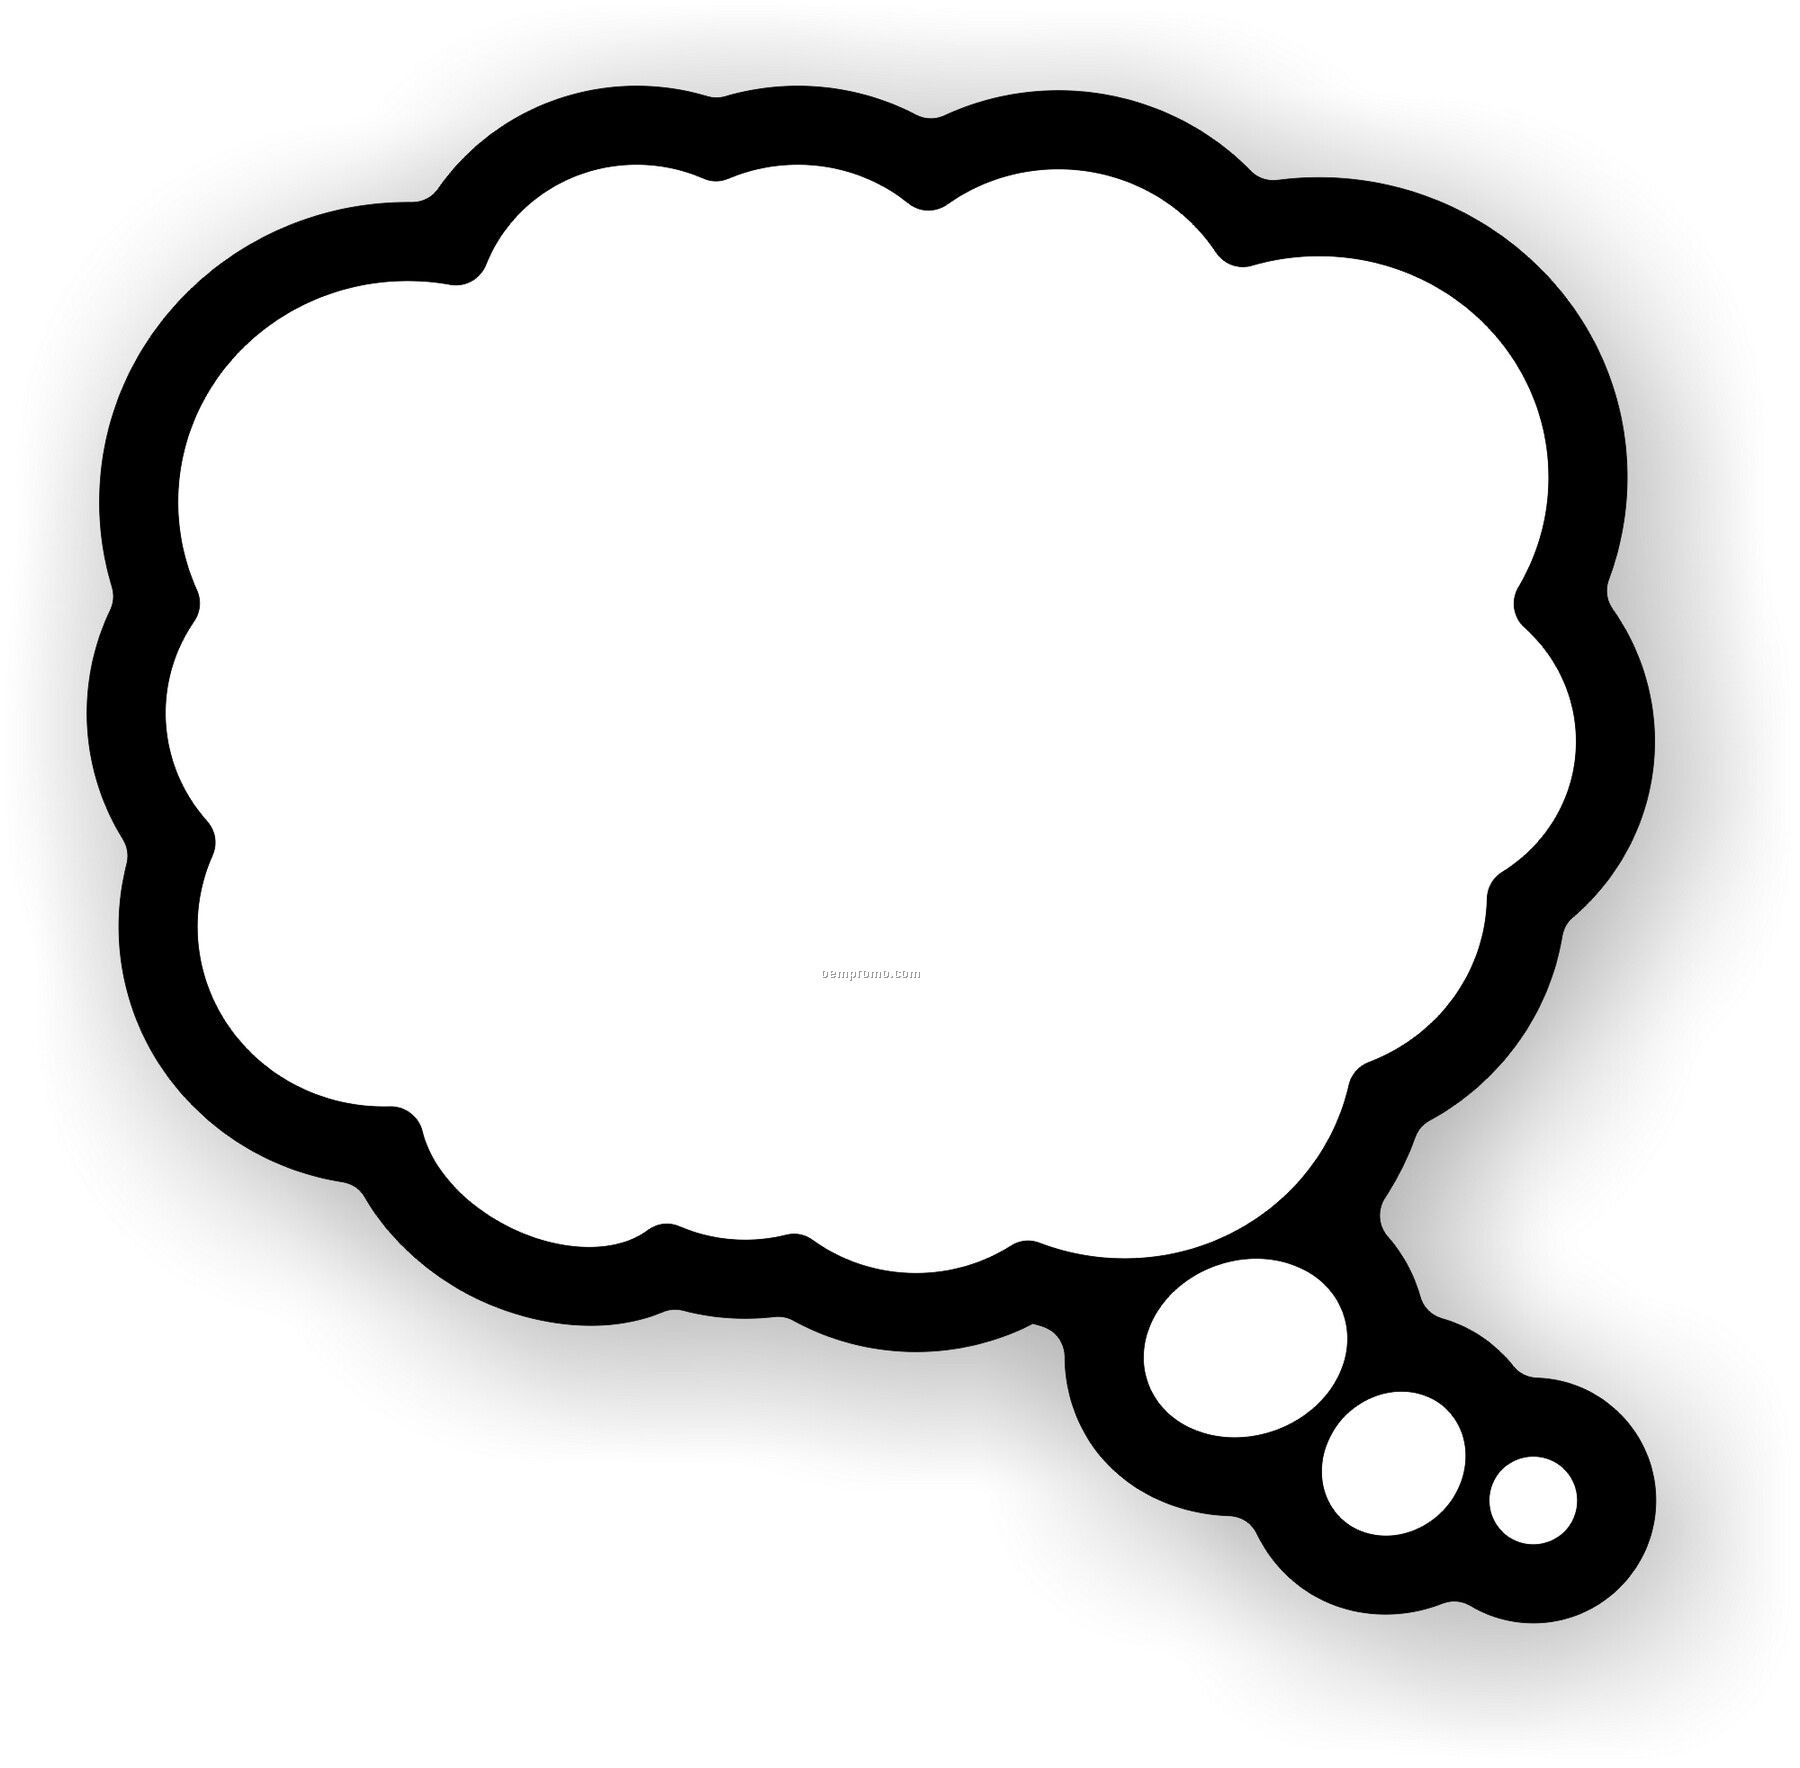 Thinking Cloud - ClipArt Best